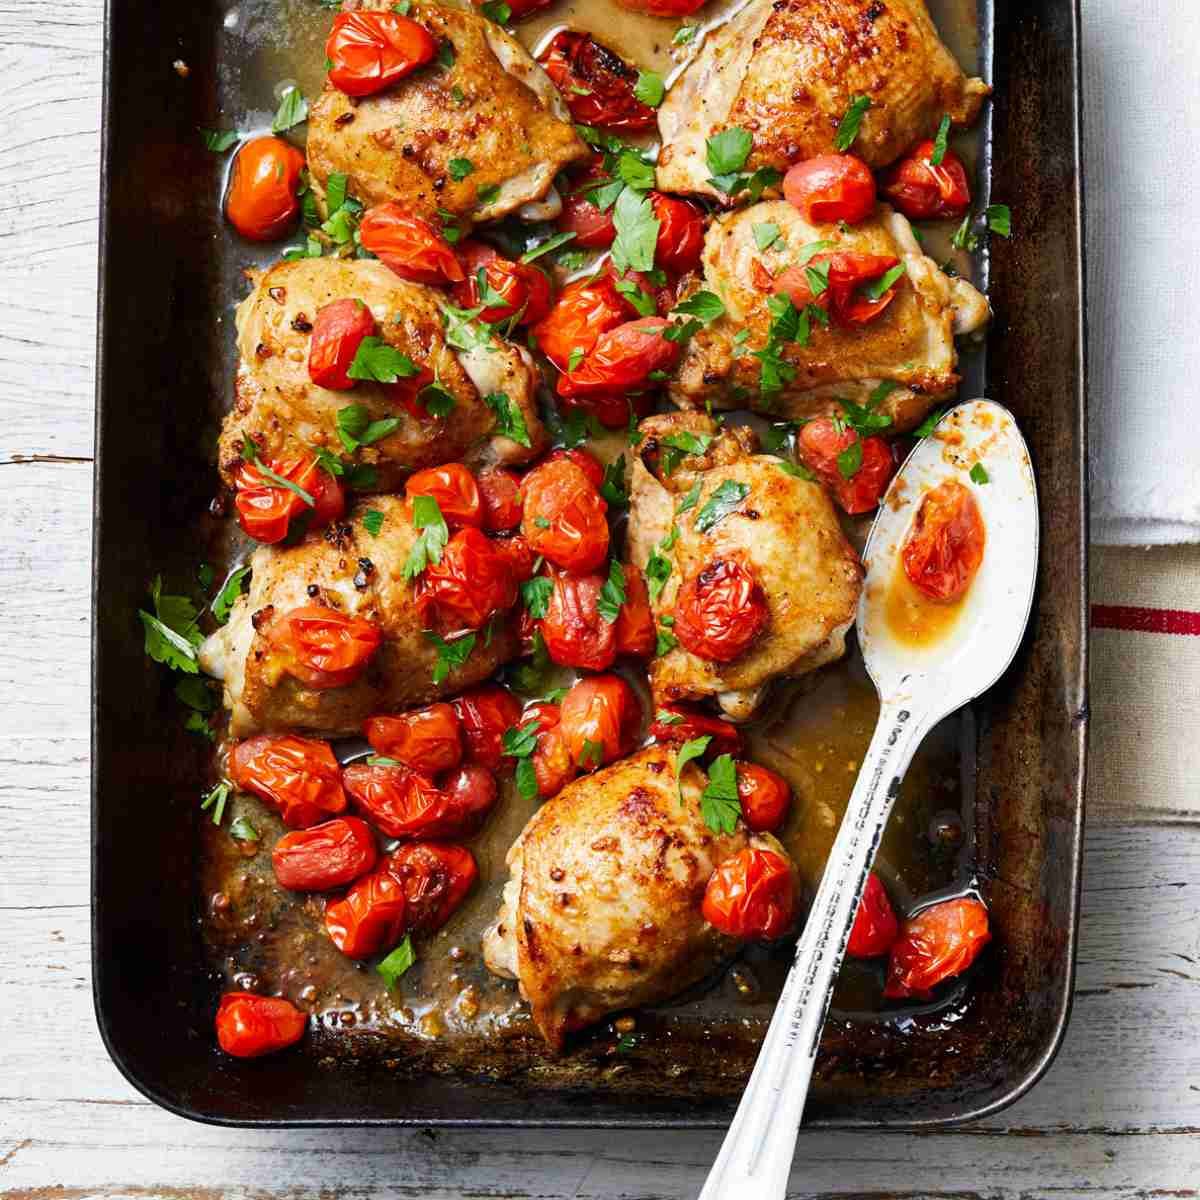 A baking tray with roasted chicken, solanato tomatoes, and herbs sprinkled on top with a spoon. https://www.perfection.com.au/recipes/roast-solanato-tomato-and-mustard-chicken-with-french-fries?hsLang=en-au 